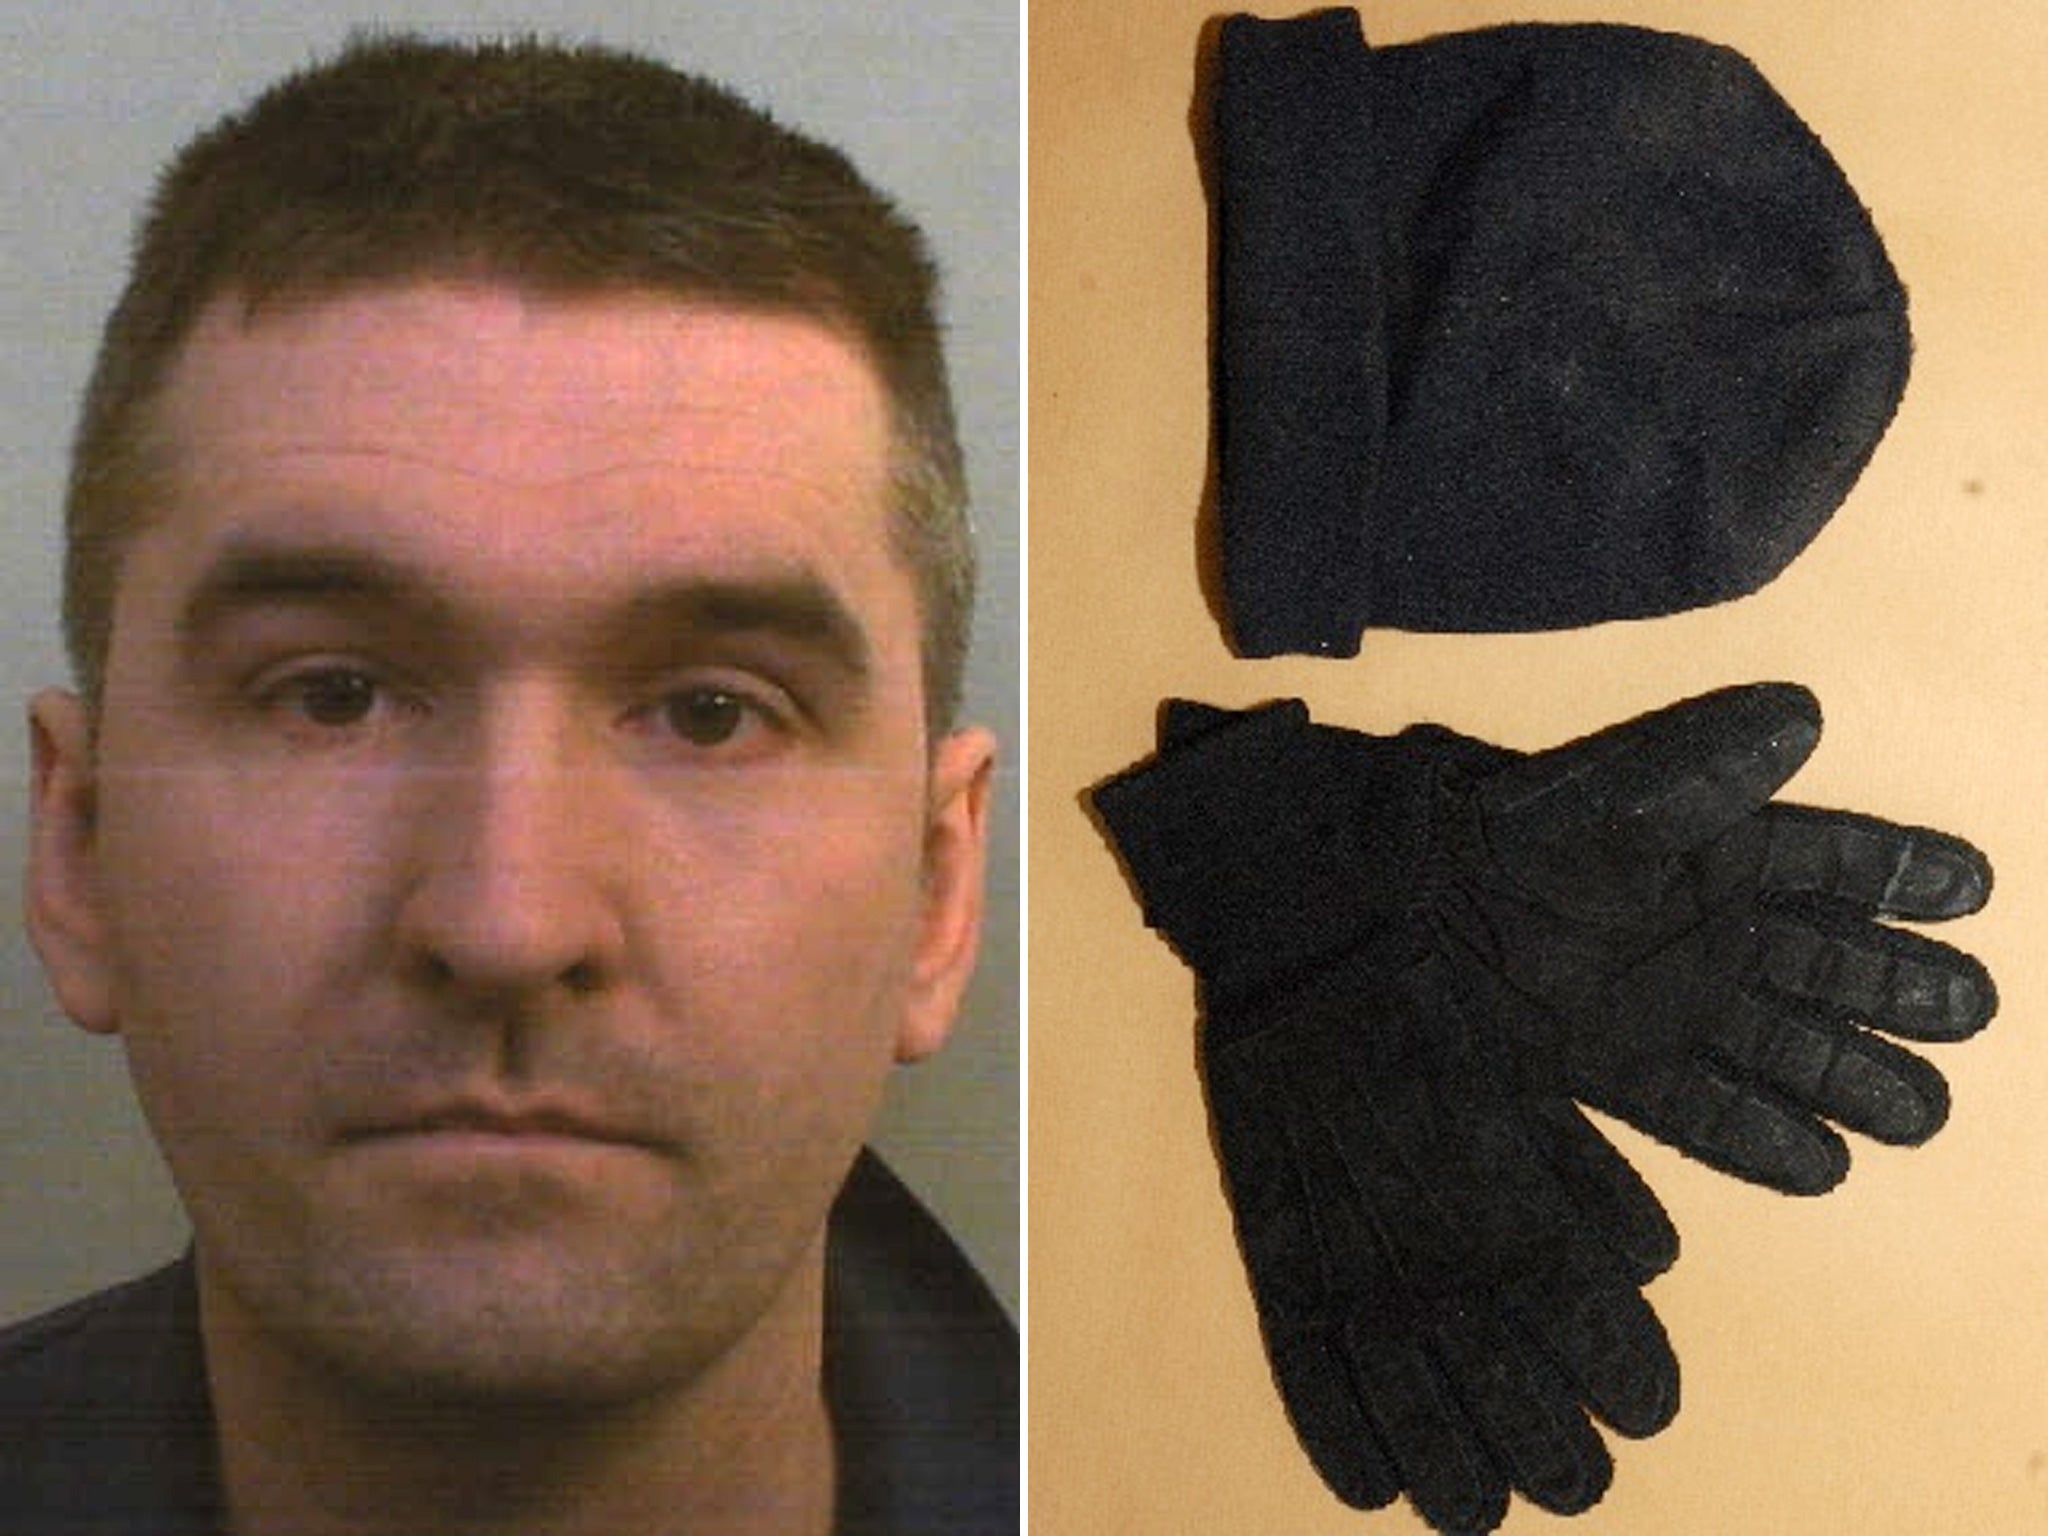 Prolific sex attacker Nigel Turner and items seized during the investigation